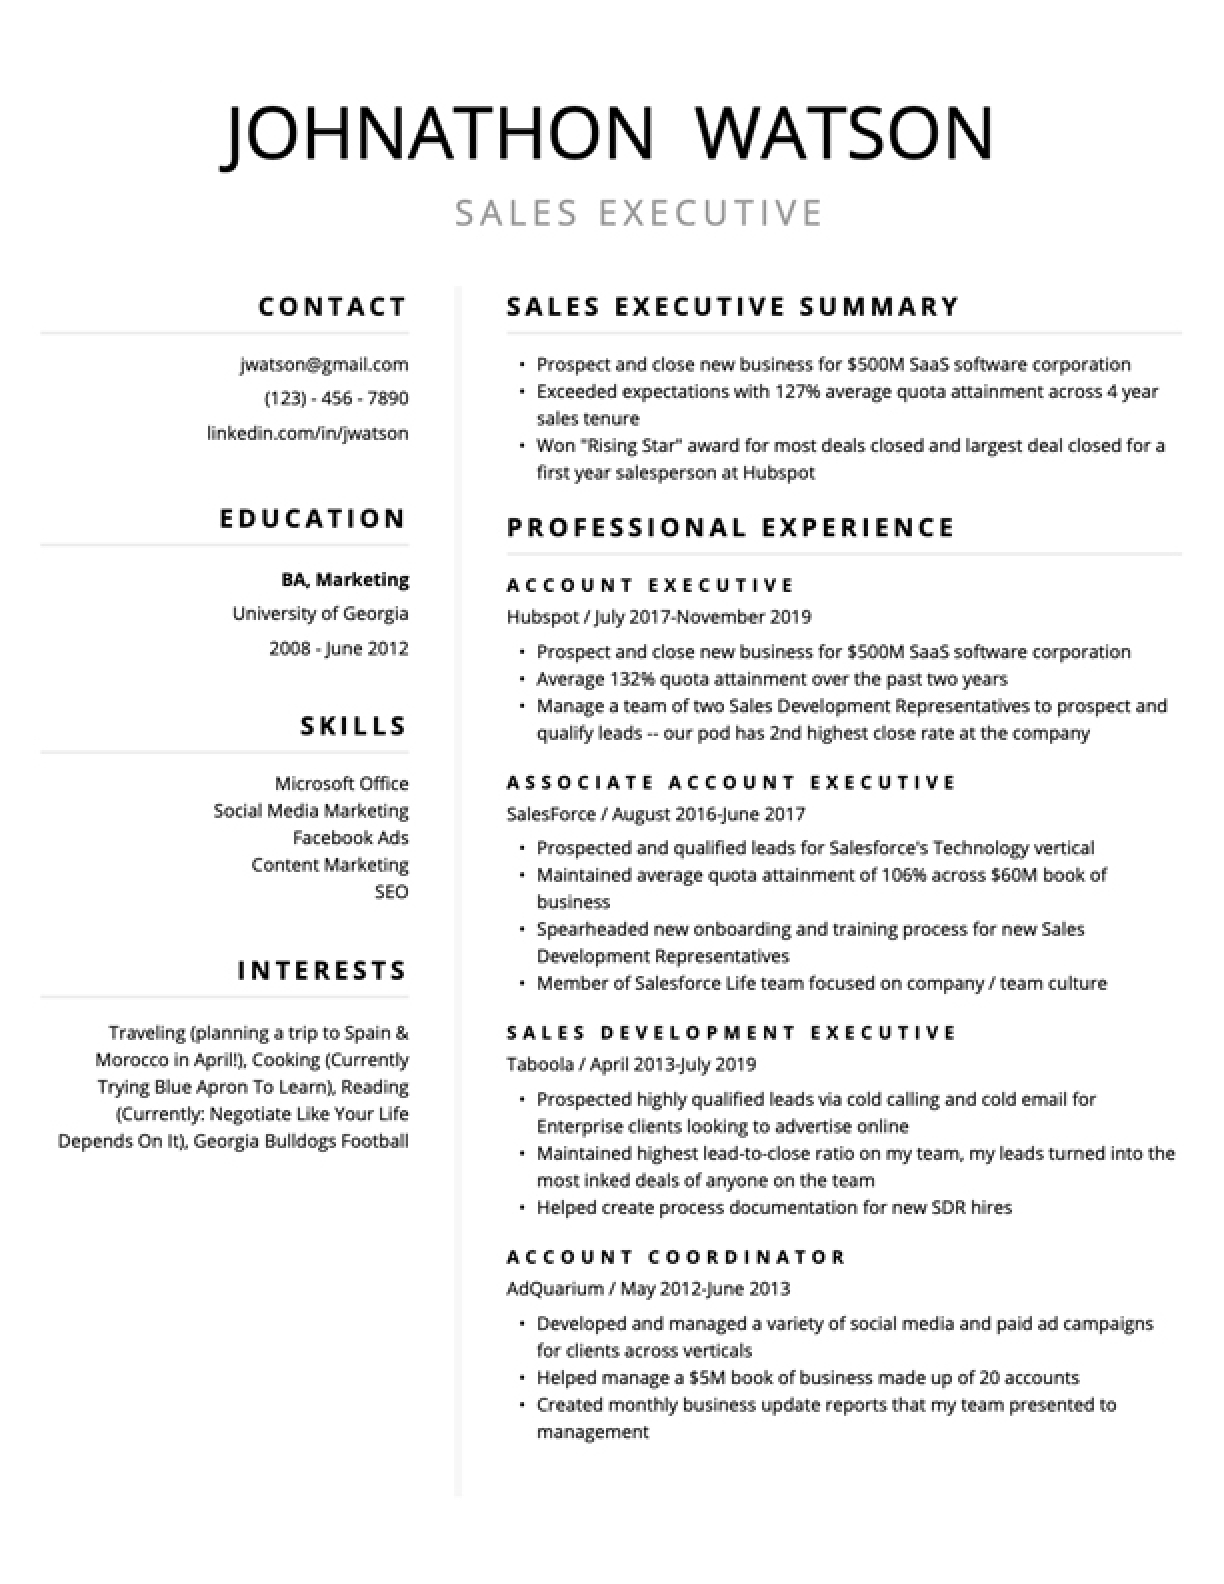 Professional & Creative Design Medical Student Resume BEST Selling Resume Templates Resume Template